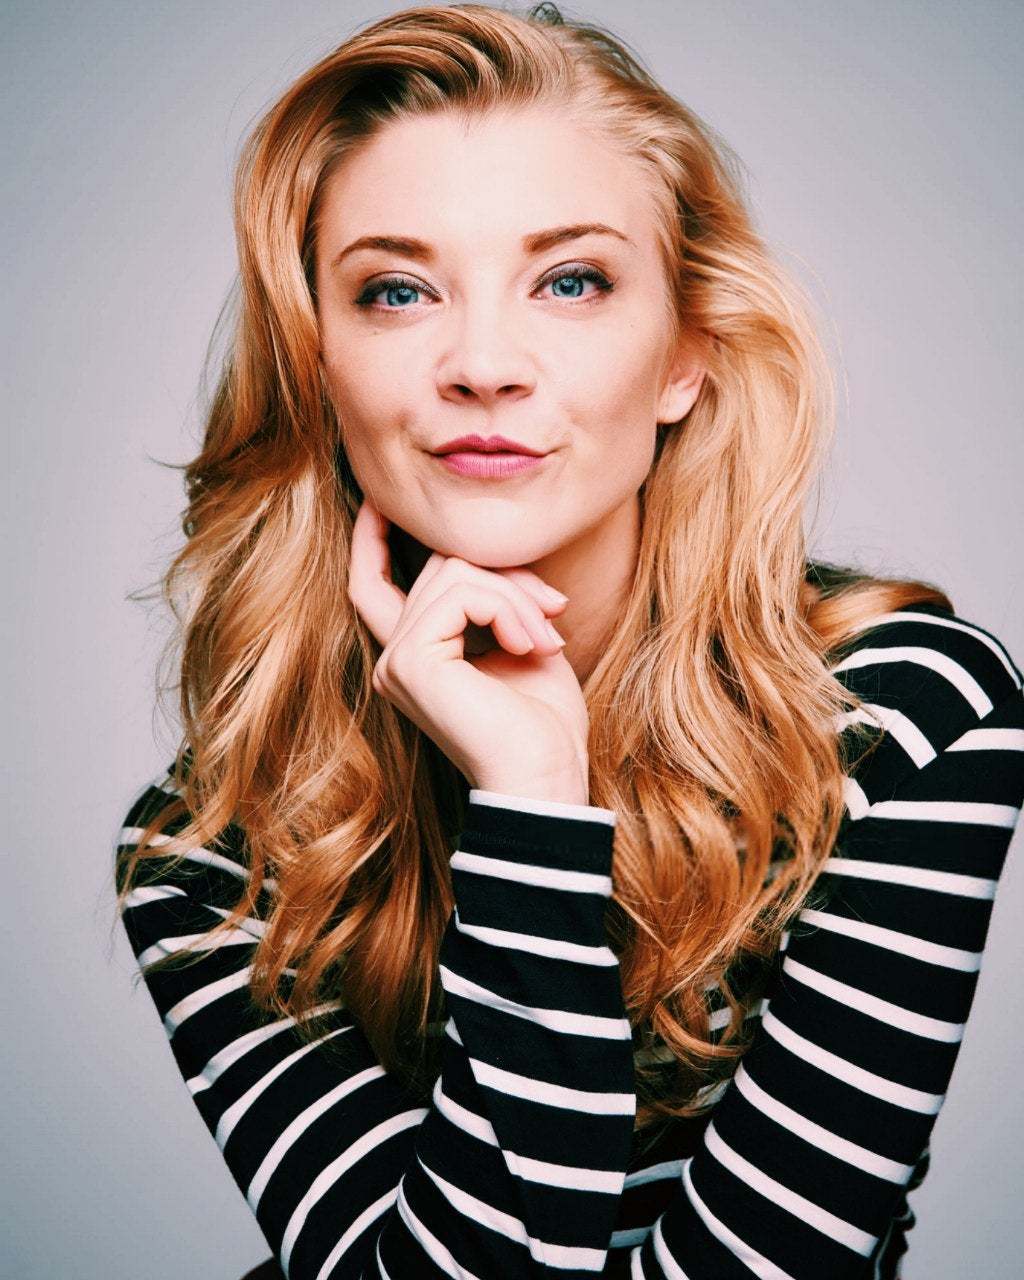 Natalie Dormer Who Wants To Have A Rough Threesome With Her Scrolller